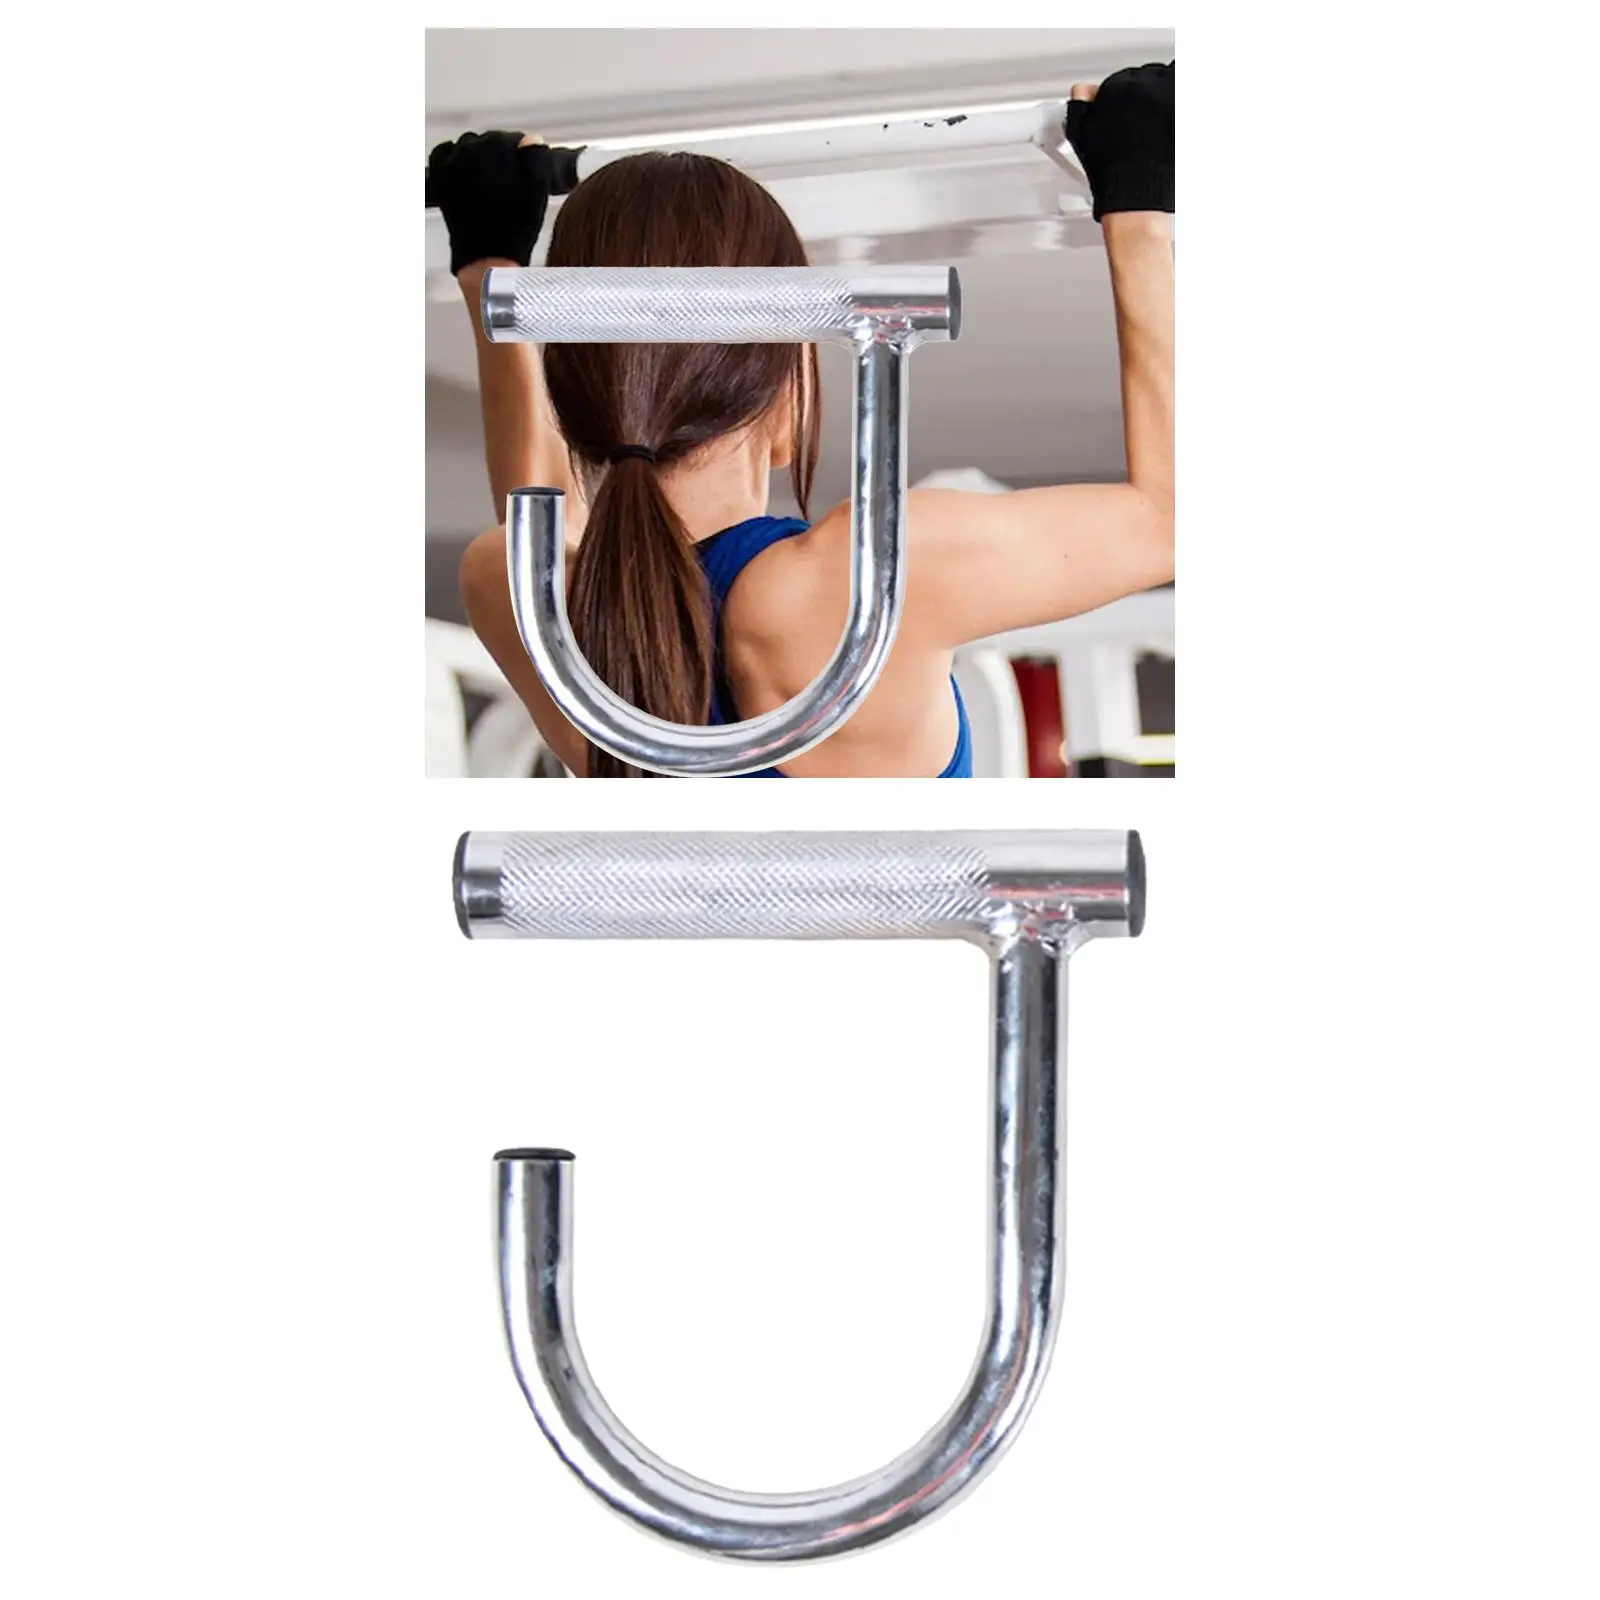 Portable grip Handle Non Slip Cable Machine Body Fitness Equipment Pull Down Bar Grip pull down Assistance Hook Bar for Gym